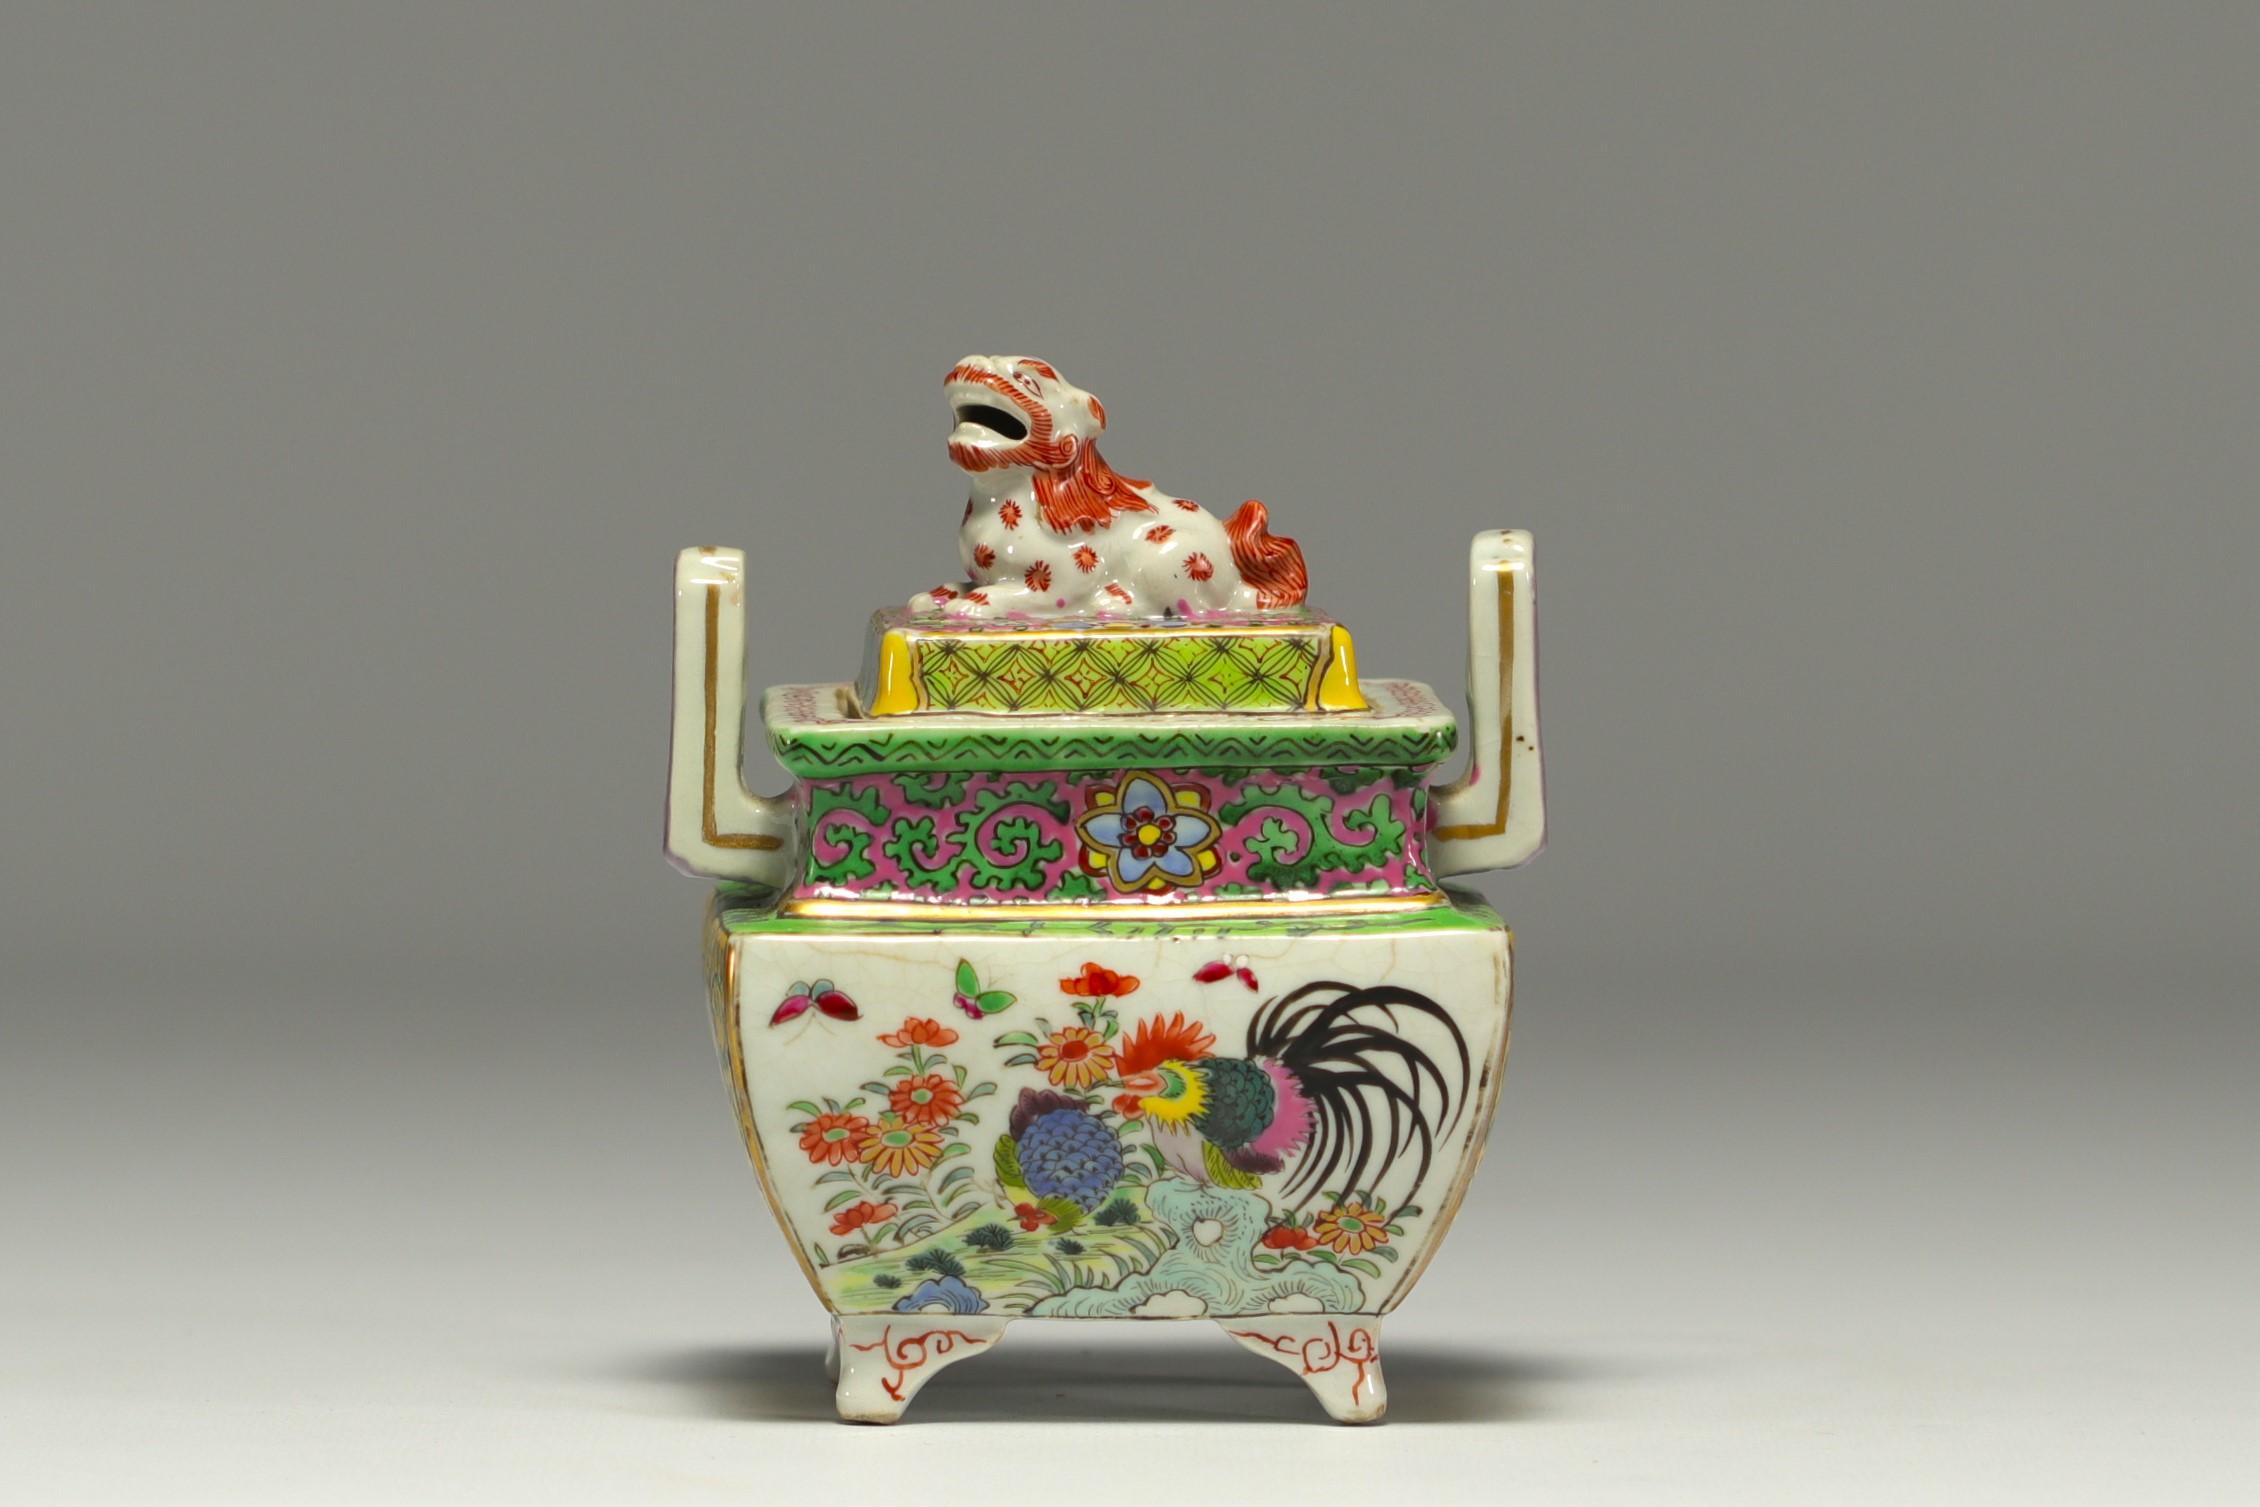 China - Small polychrome porcelain perfume burner with floral decoration, rooster and Fo dog. - Image 2 of 3